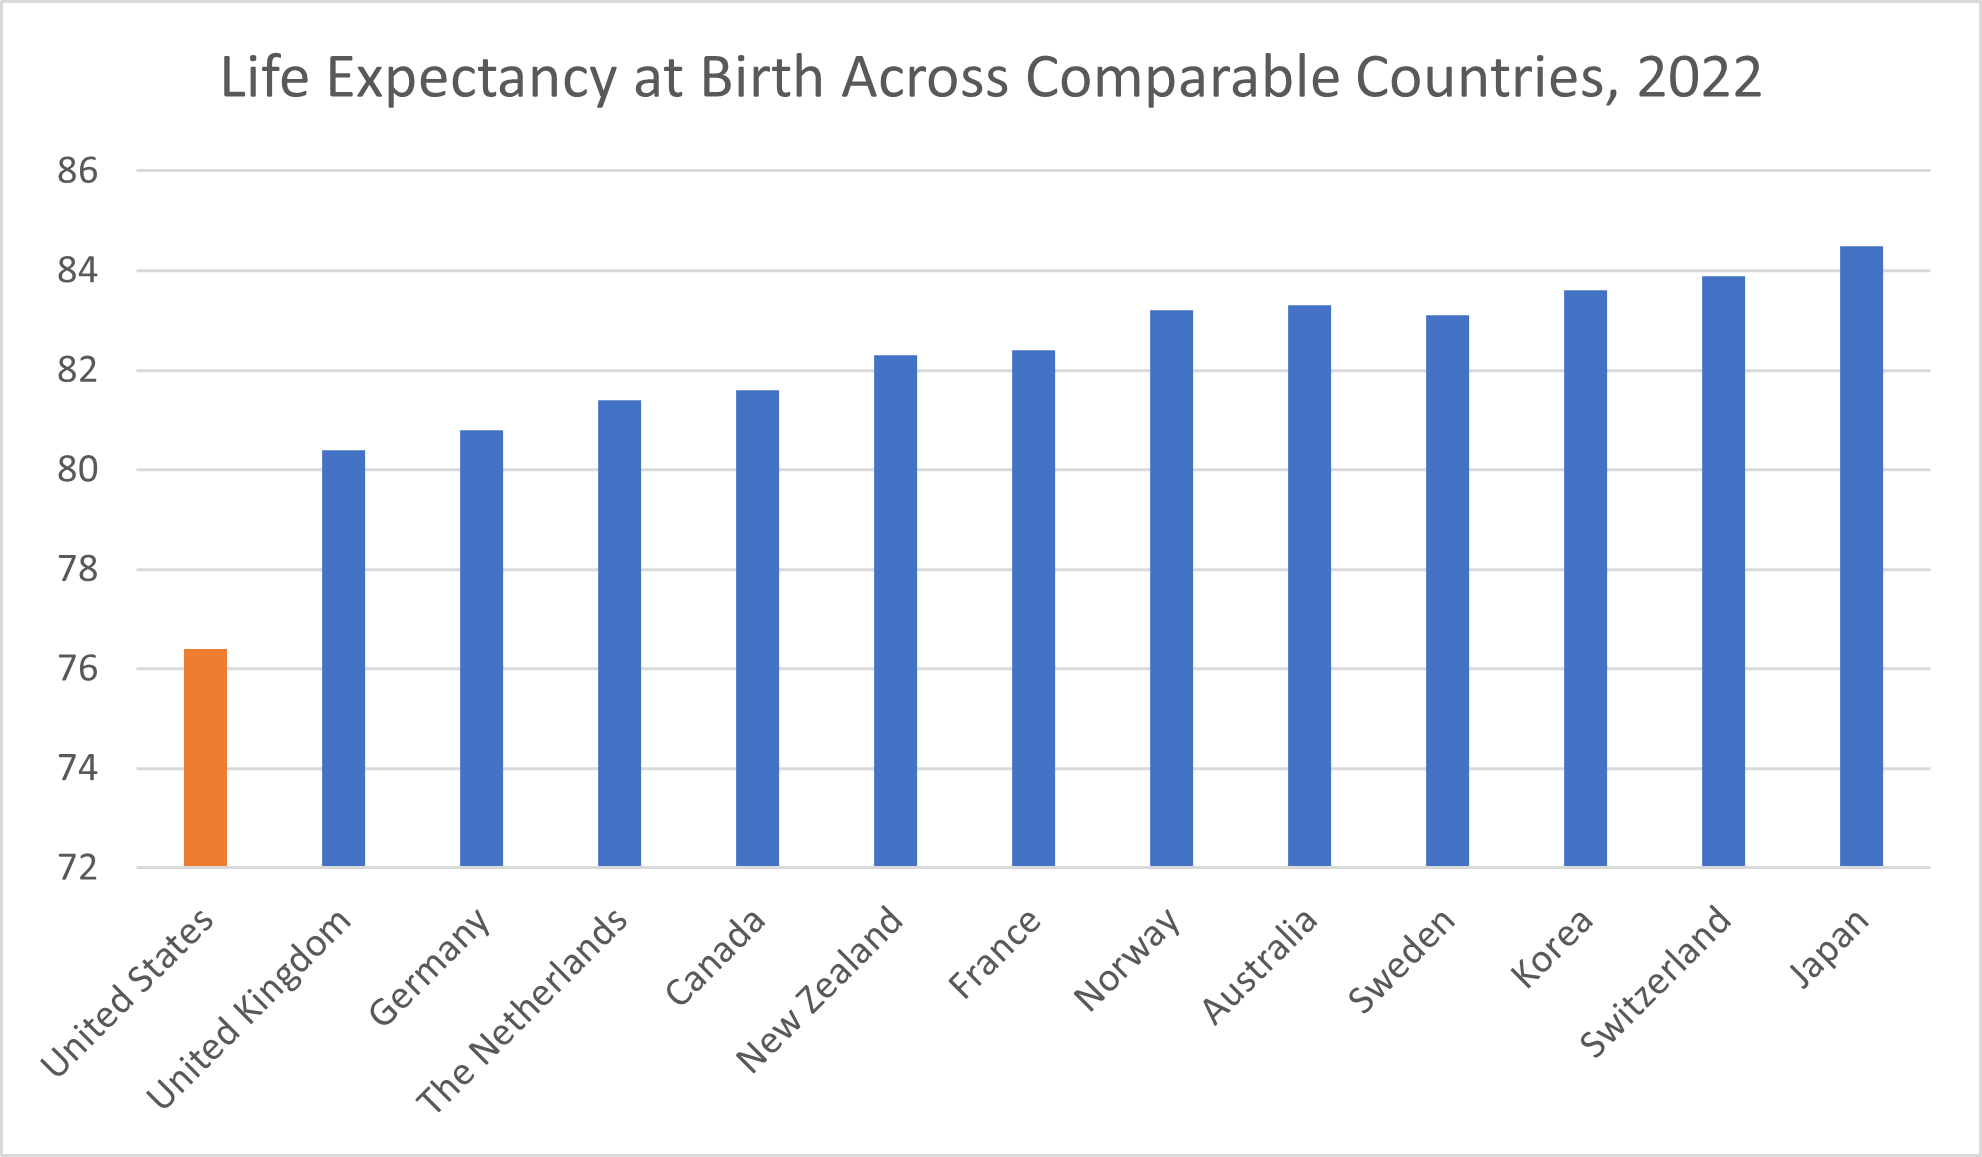 Life Expectancy at Birth Across Comparable Countries, 2022